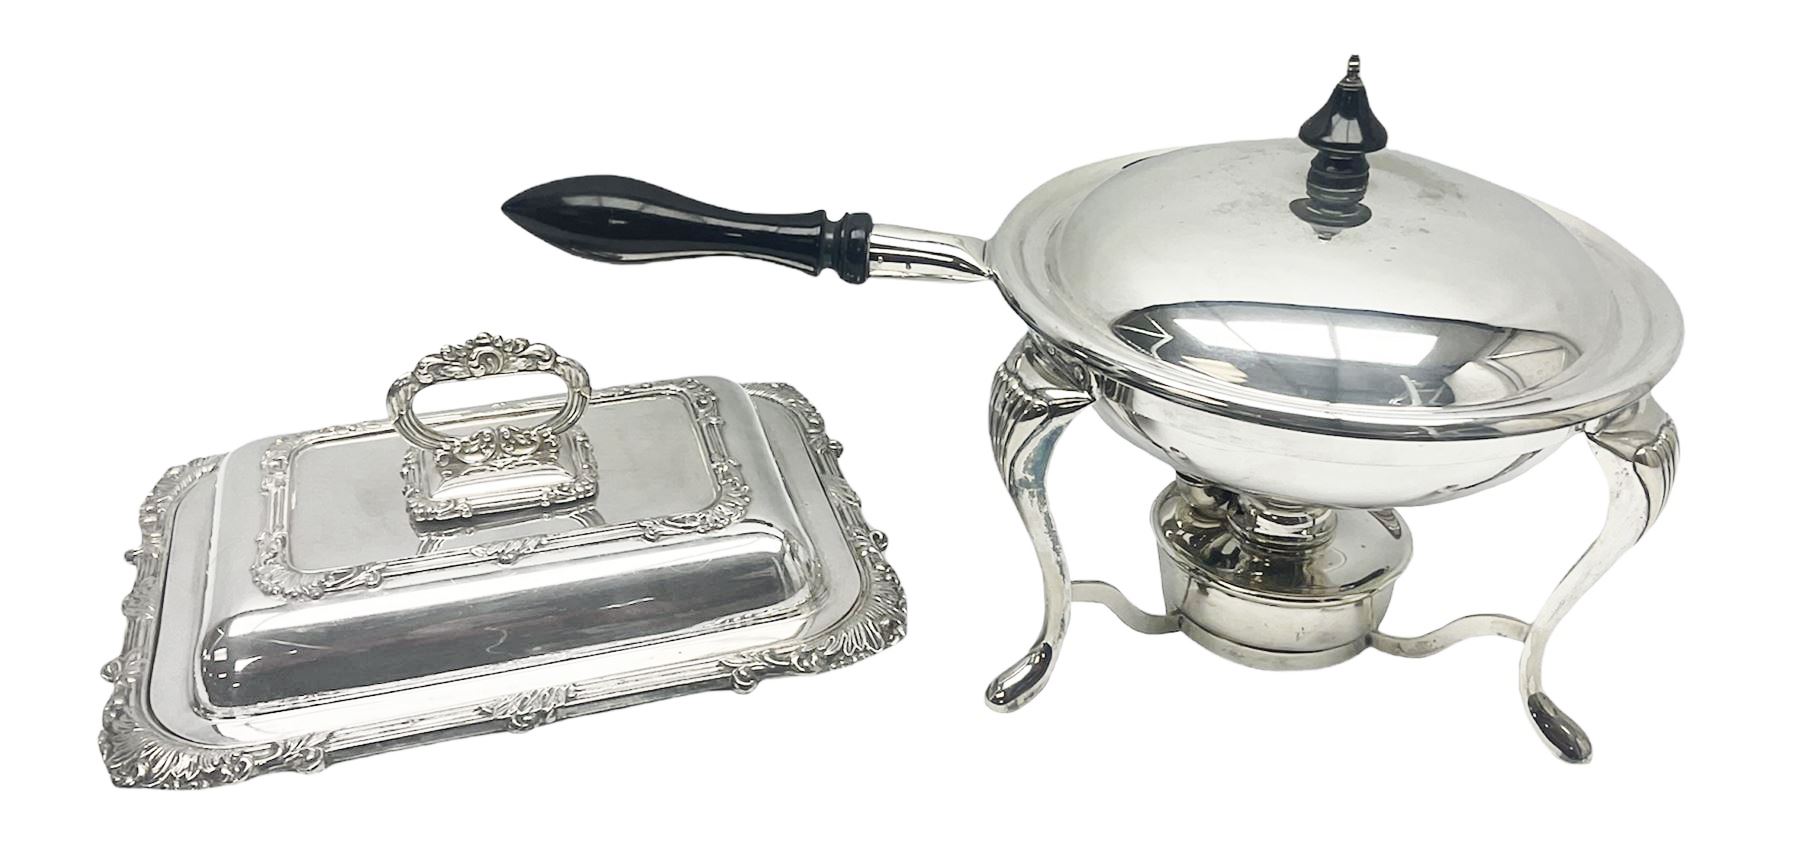 Walker & Hall silver plated long handled chafing dish